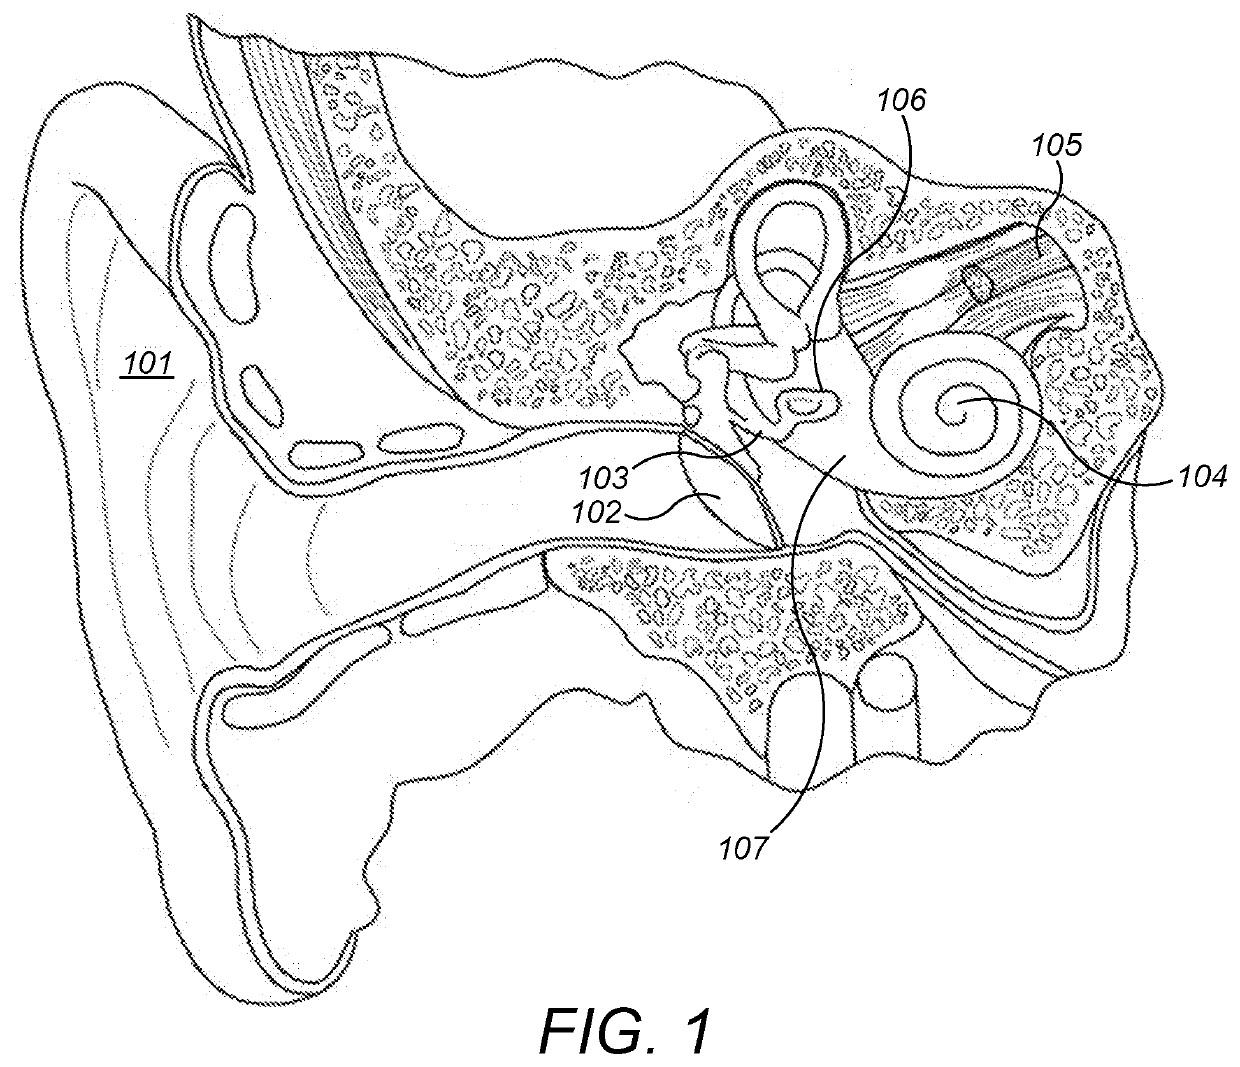 Universal Bone Conduction and Middle Ear Implant